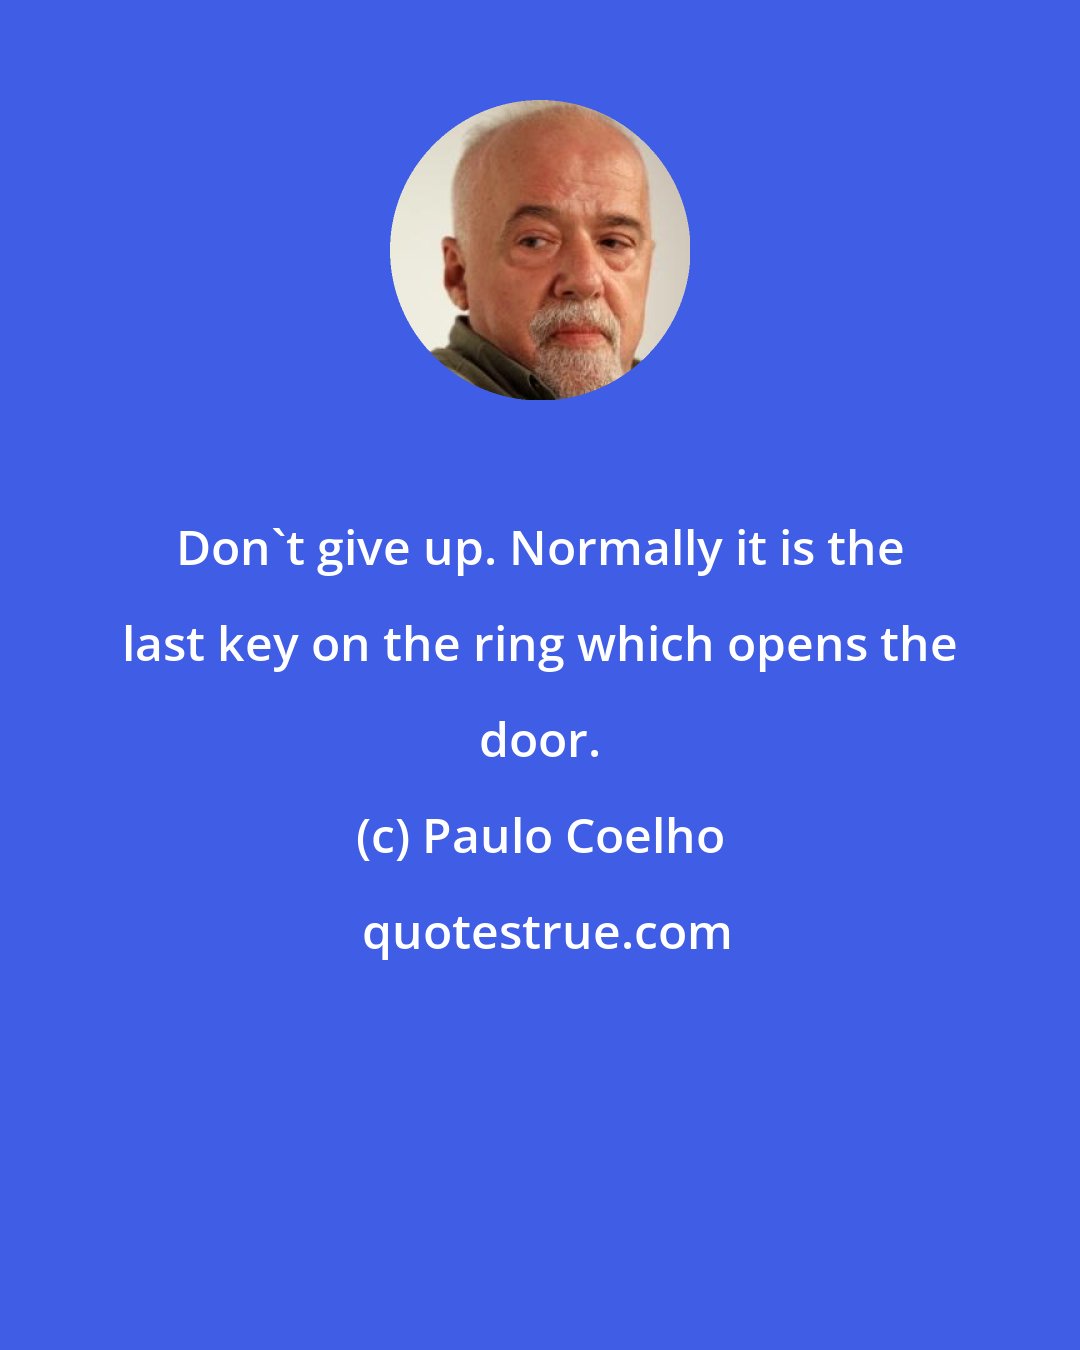 Paulo Coelho: Don't give up. Normally it is the last key on the ring which opens the door.